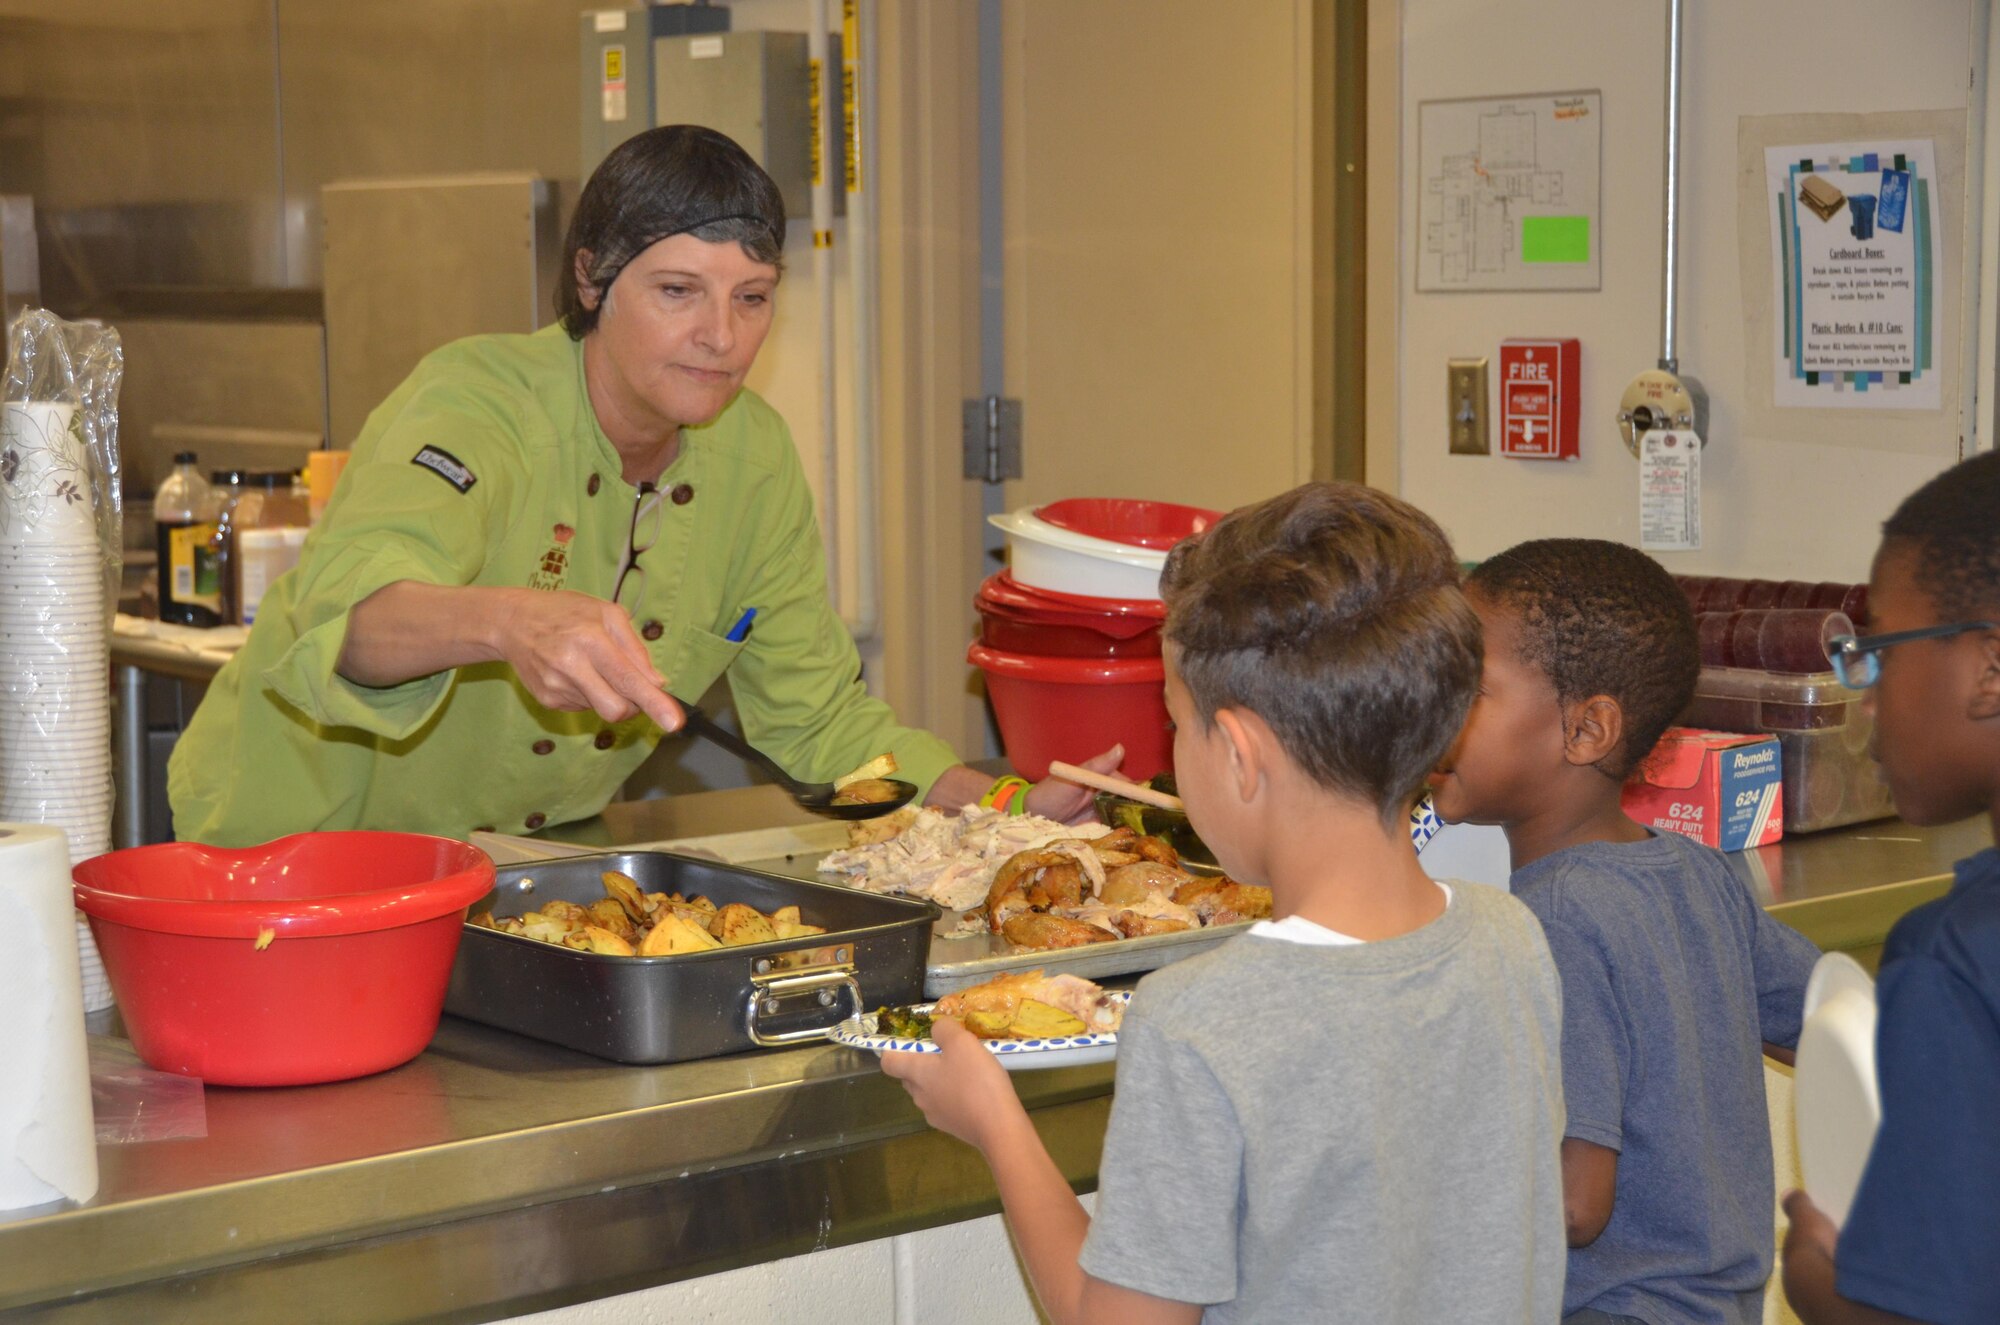 Laurie Zerga, founder of Chef-K, serves children a meal